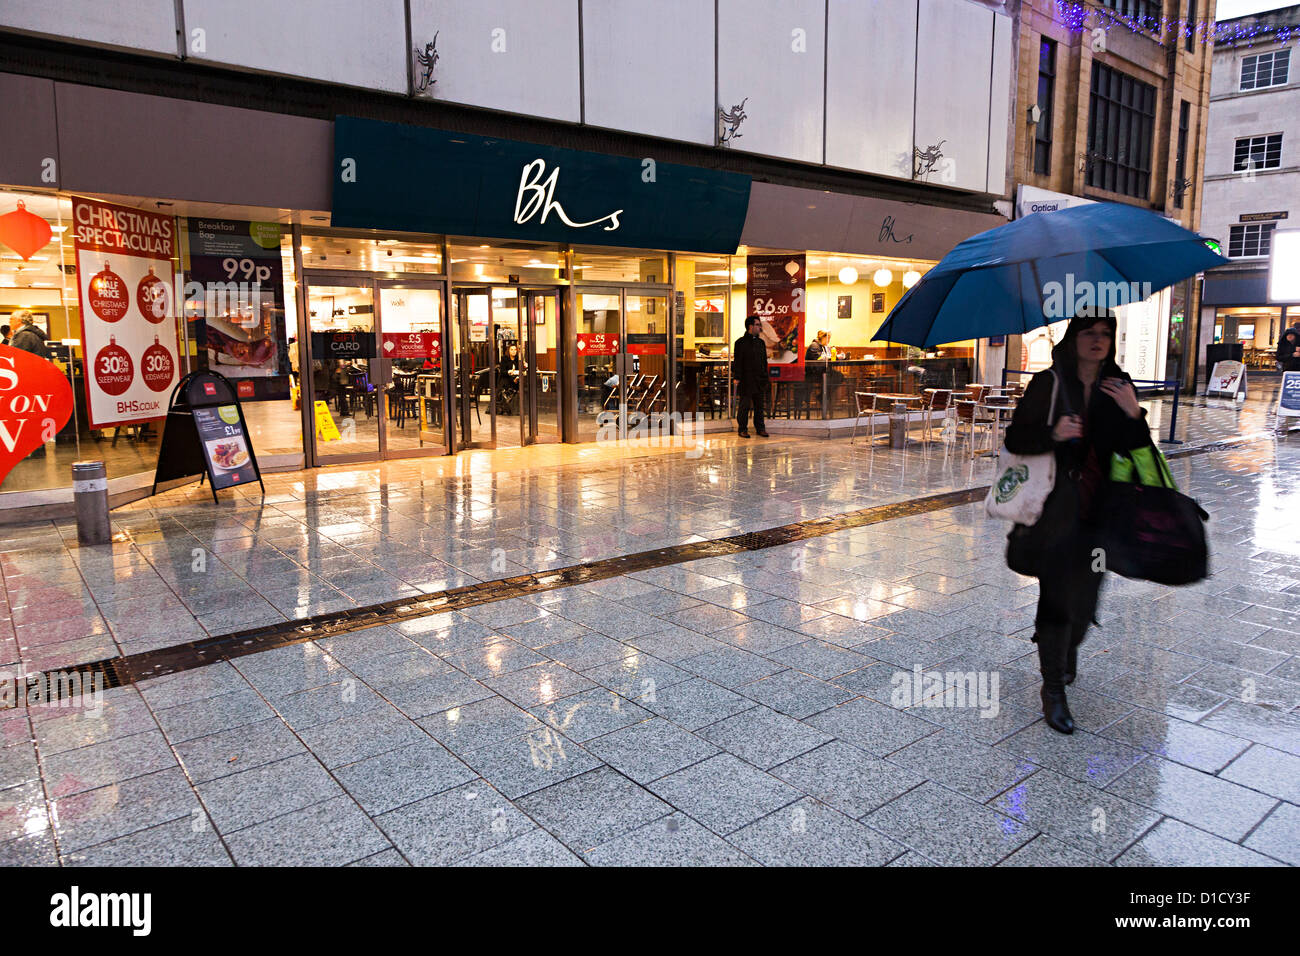 Shoppers outside BHS shop, Cardiff city centre, Wales, UK Stock Photo